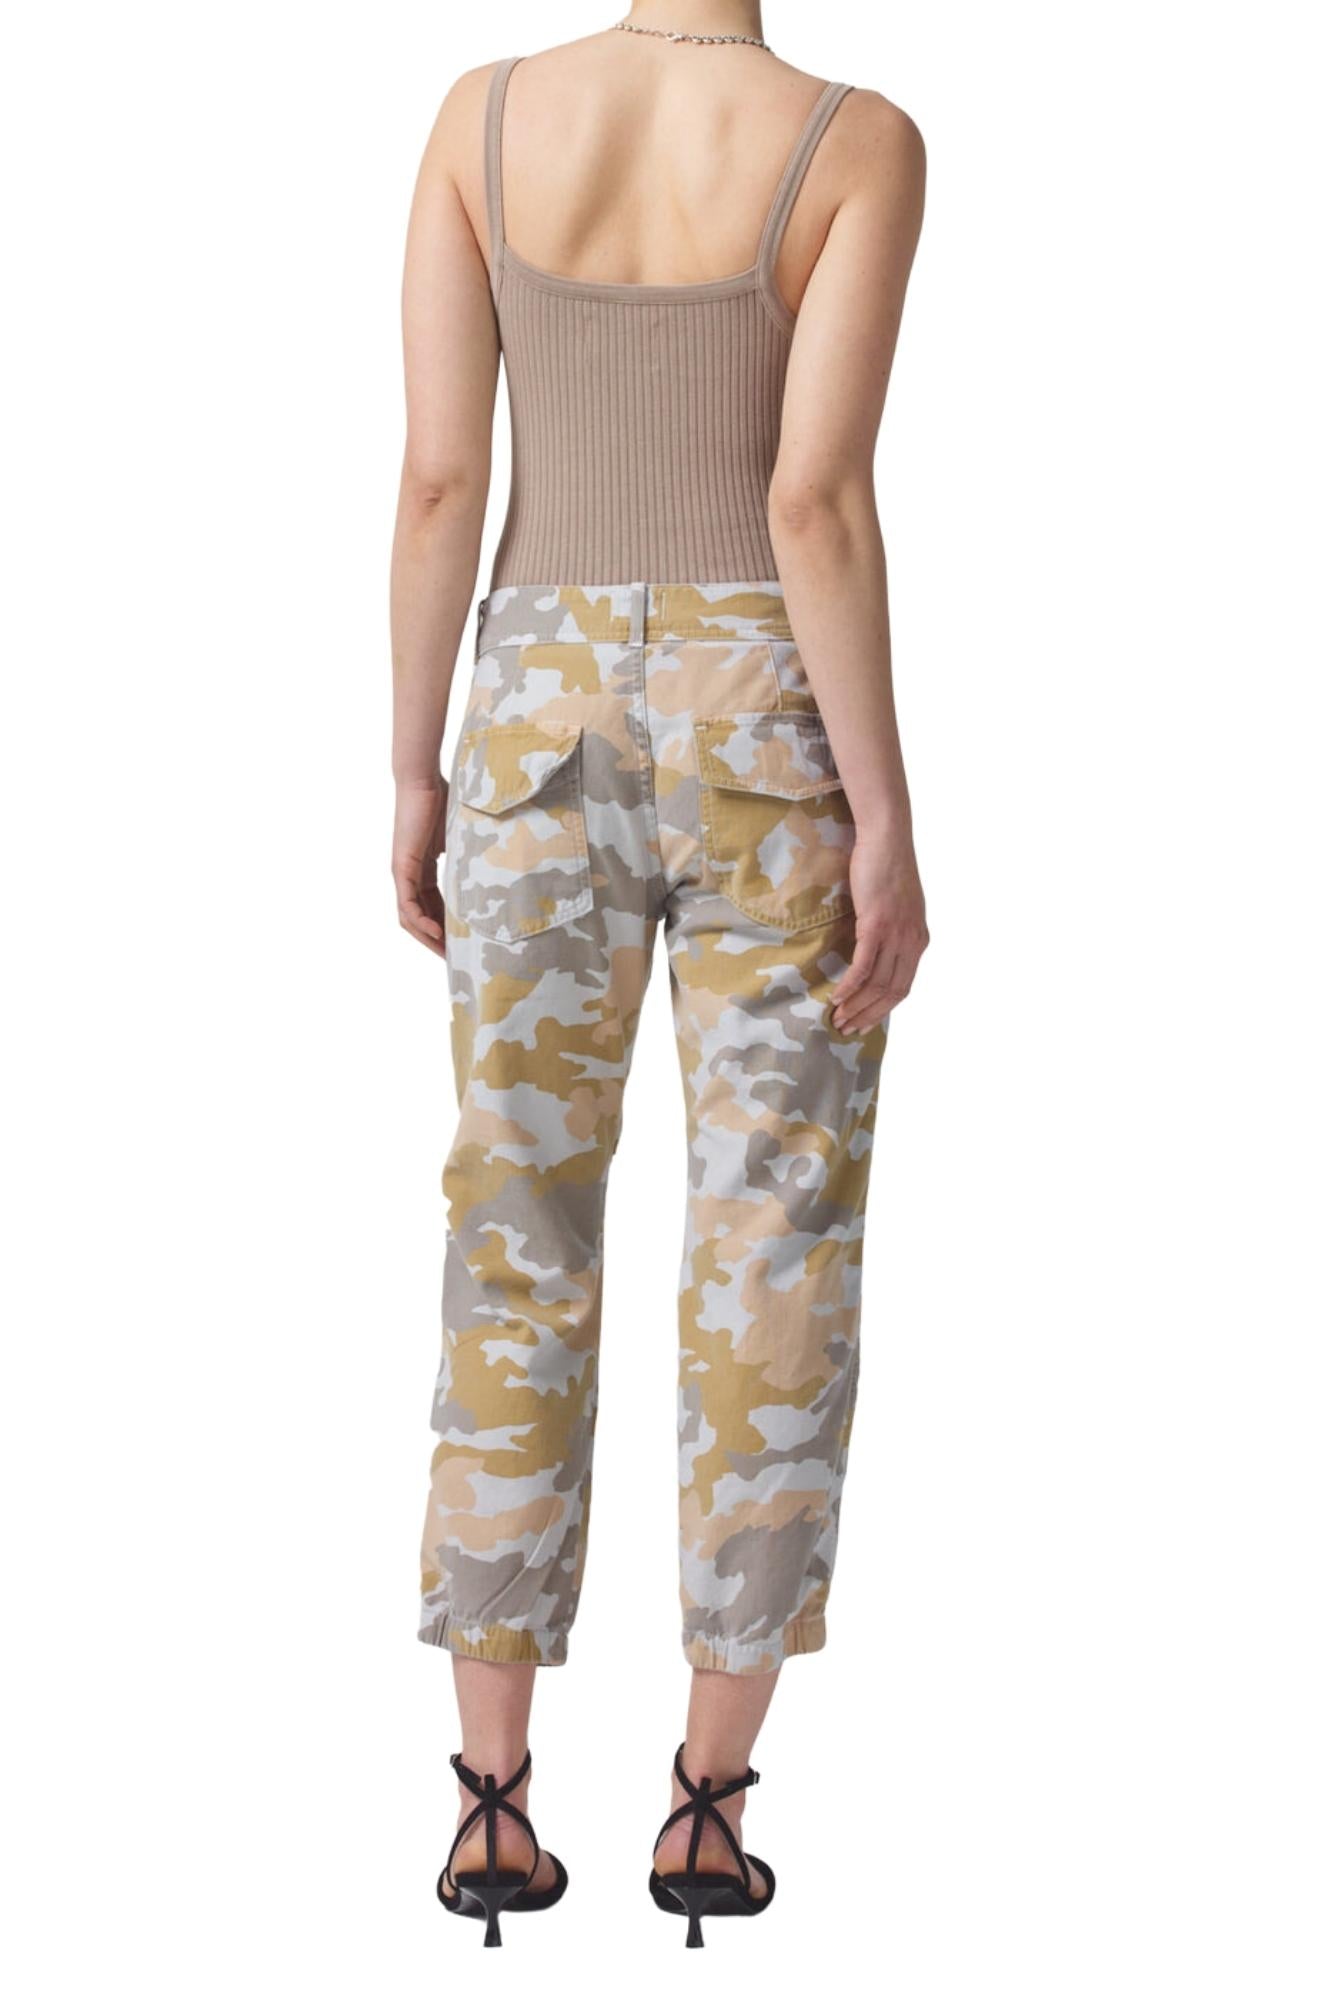 AGNI-UTILITY-TROUSER-IN-PRINT-PINK-CAMO-SUNSET-HIDEAWAY-4